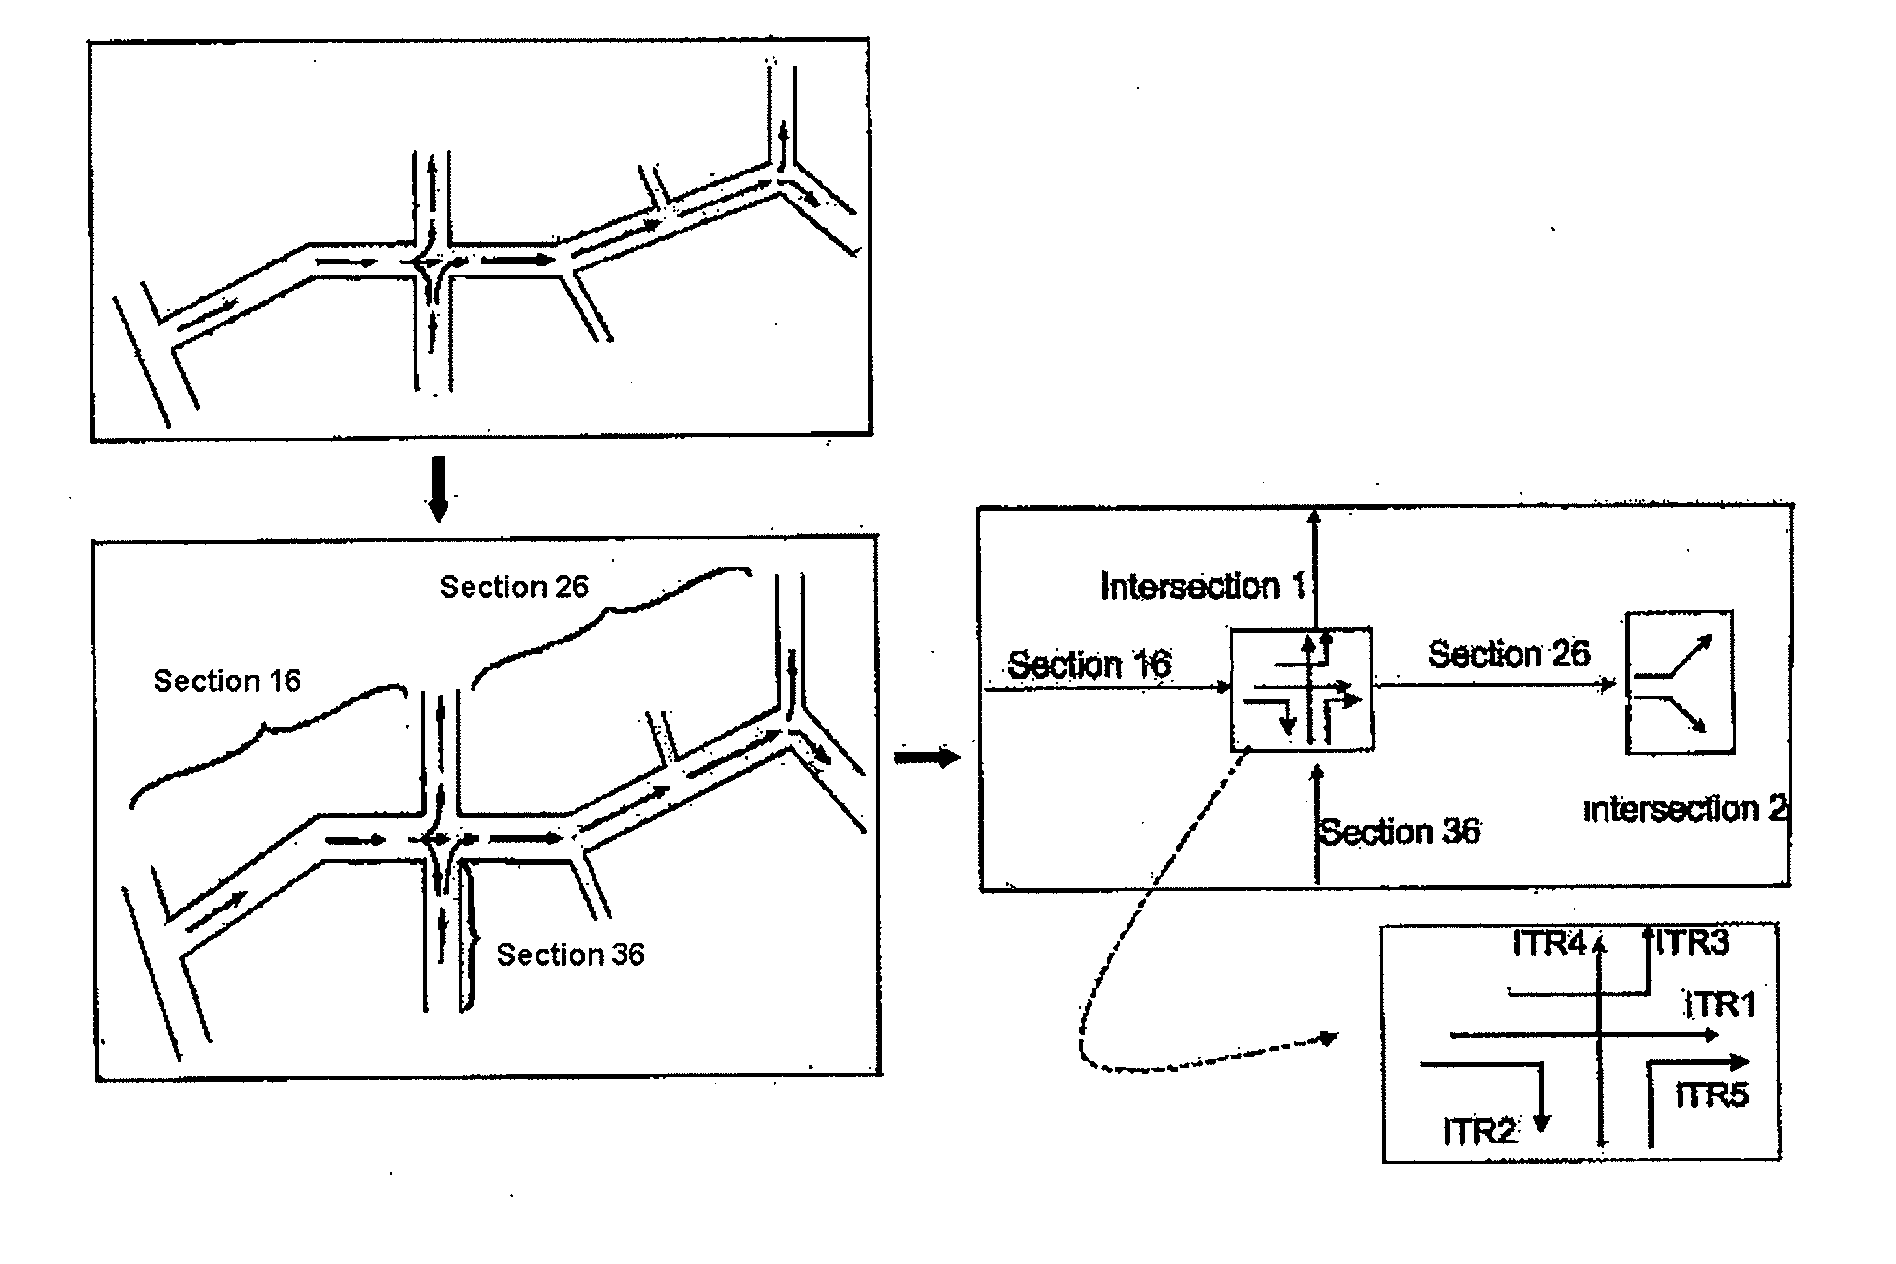 Method and apparatus for processing traffic information based on intersections and sections